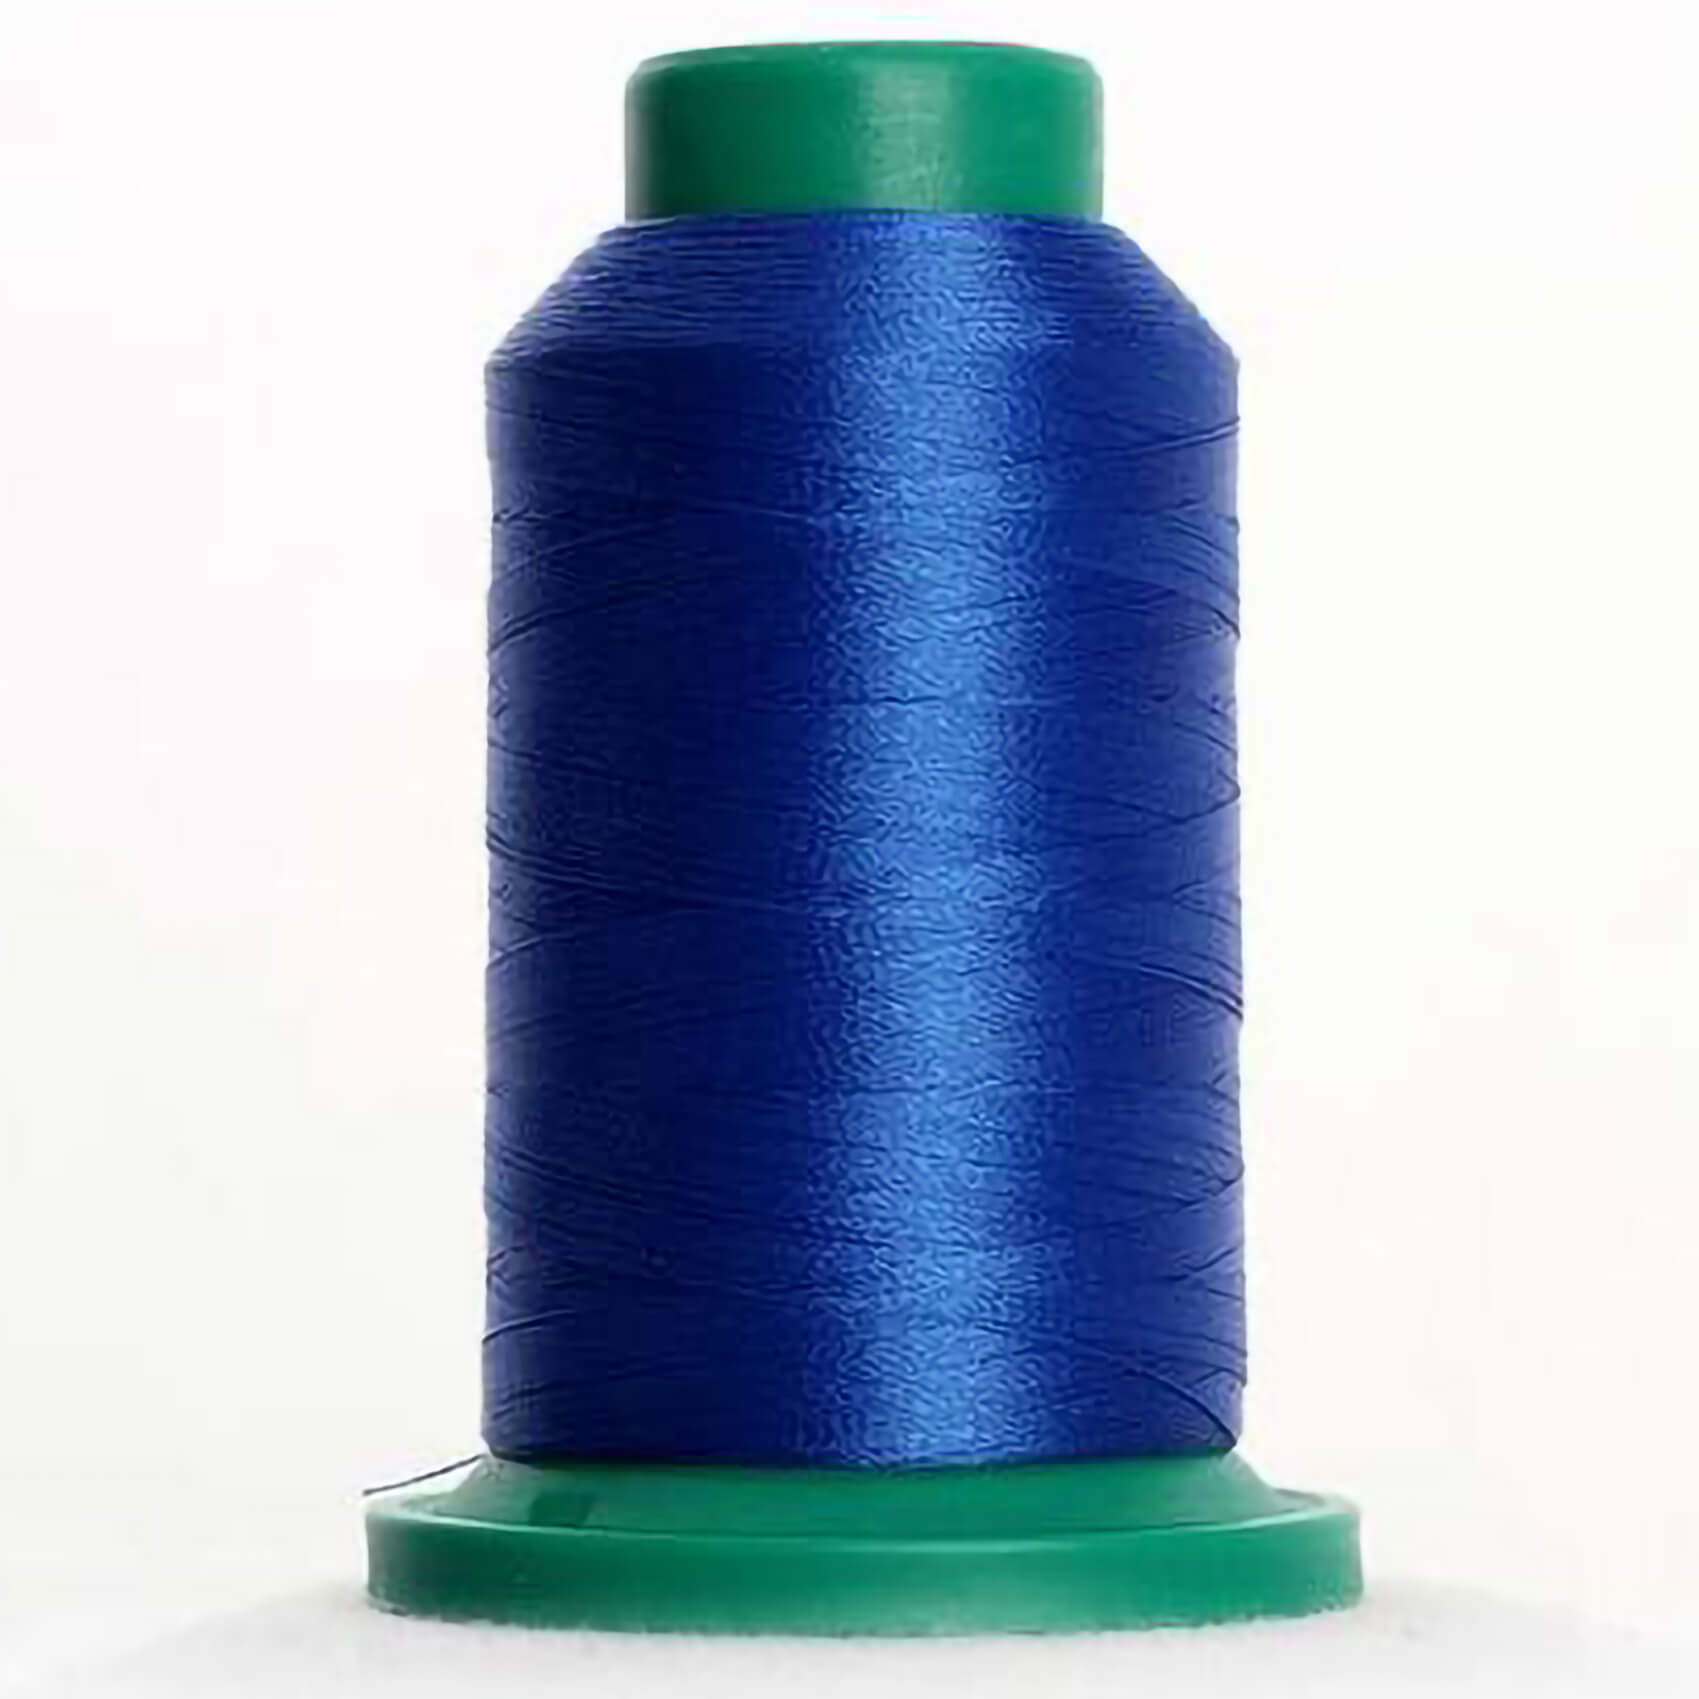 Isacord Embroidery Thread available at Nancy Zieman Productions at ShopNZP.com